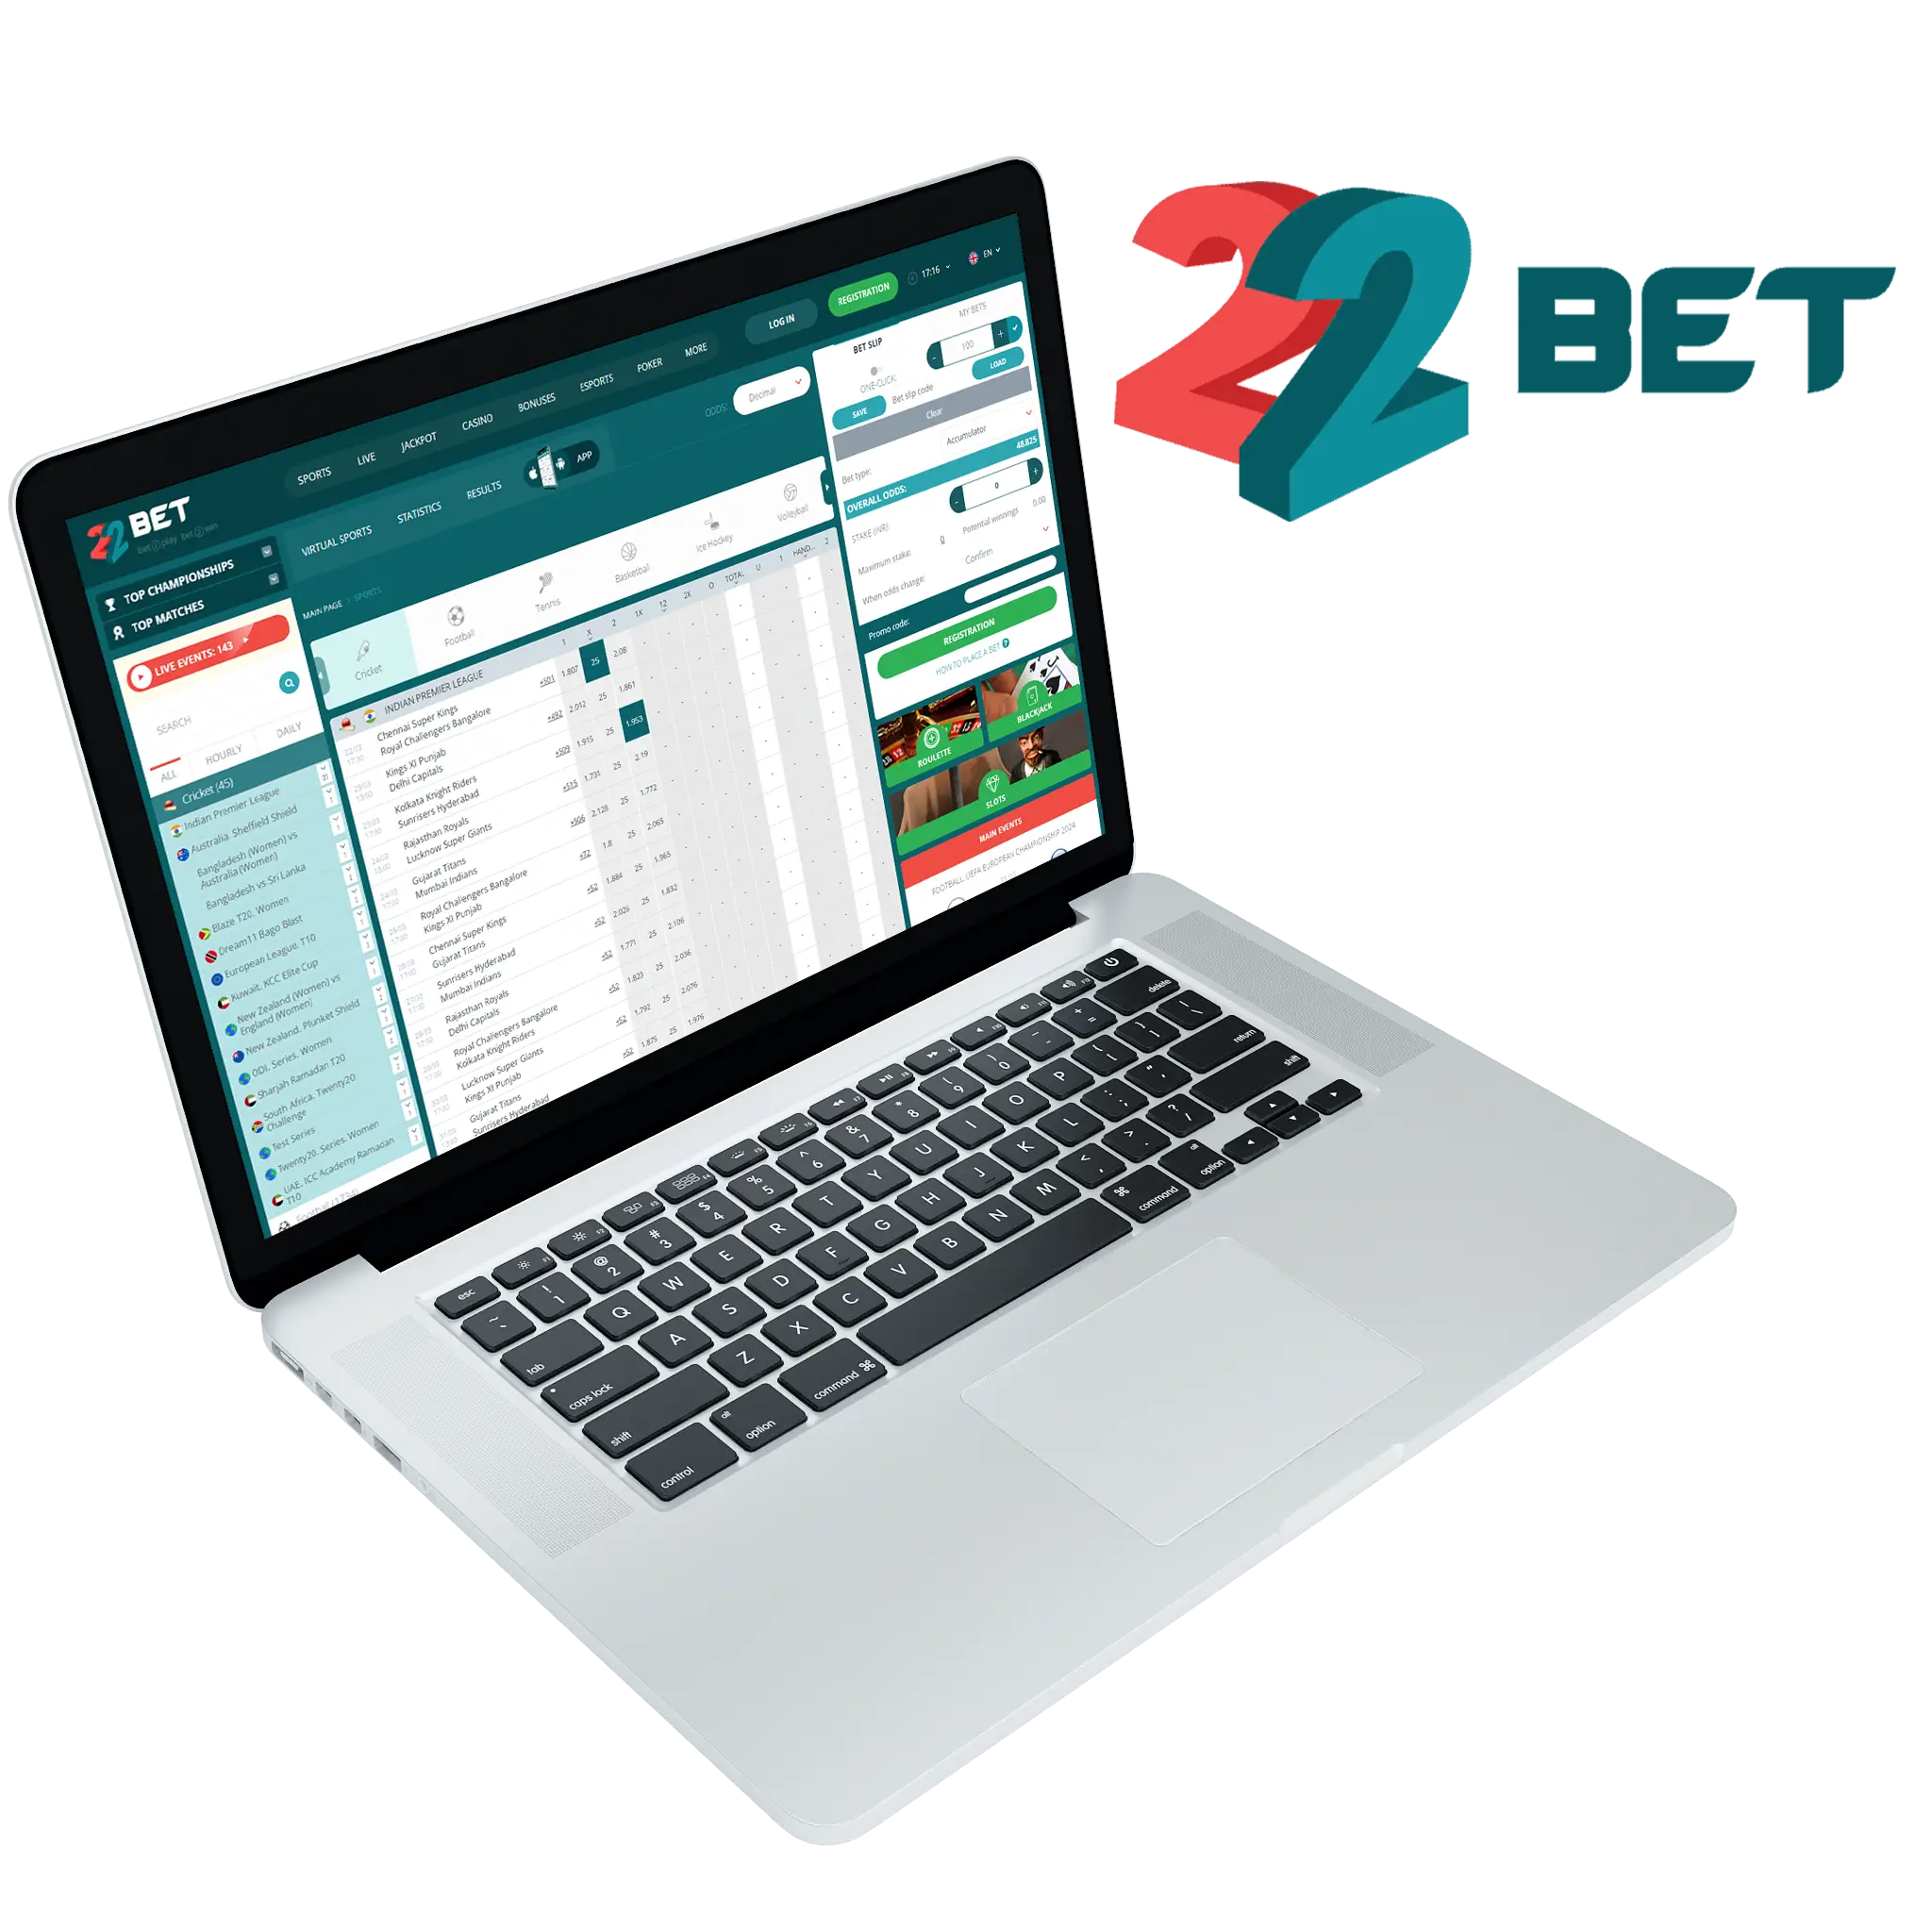 22bet provides an opportunity to increase your account balance with deposit bonus matches and various other goods.